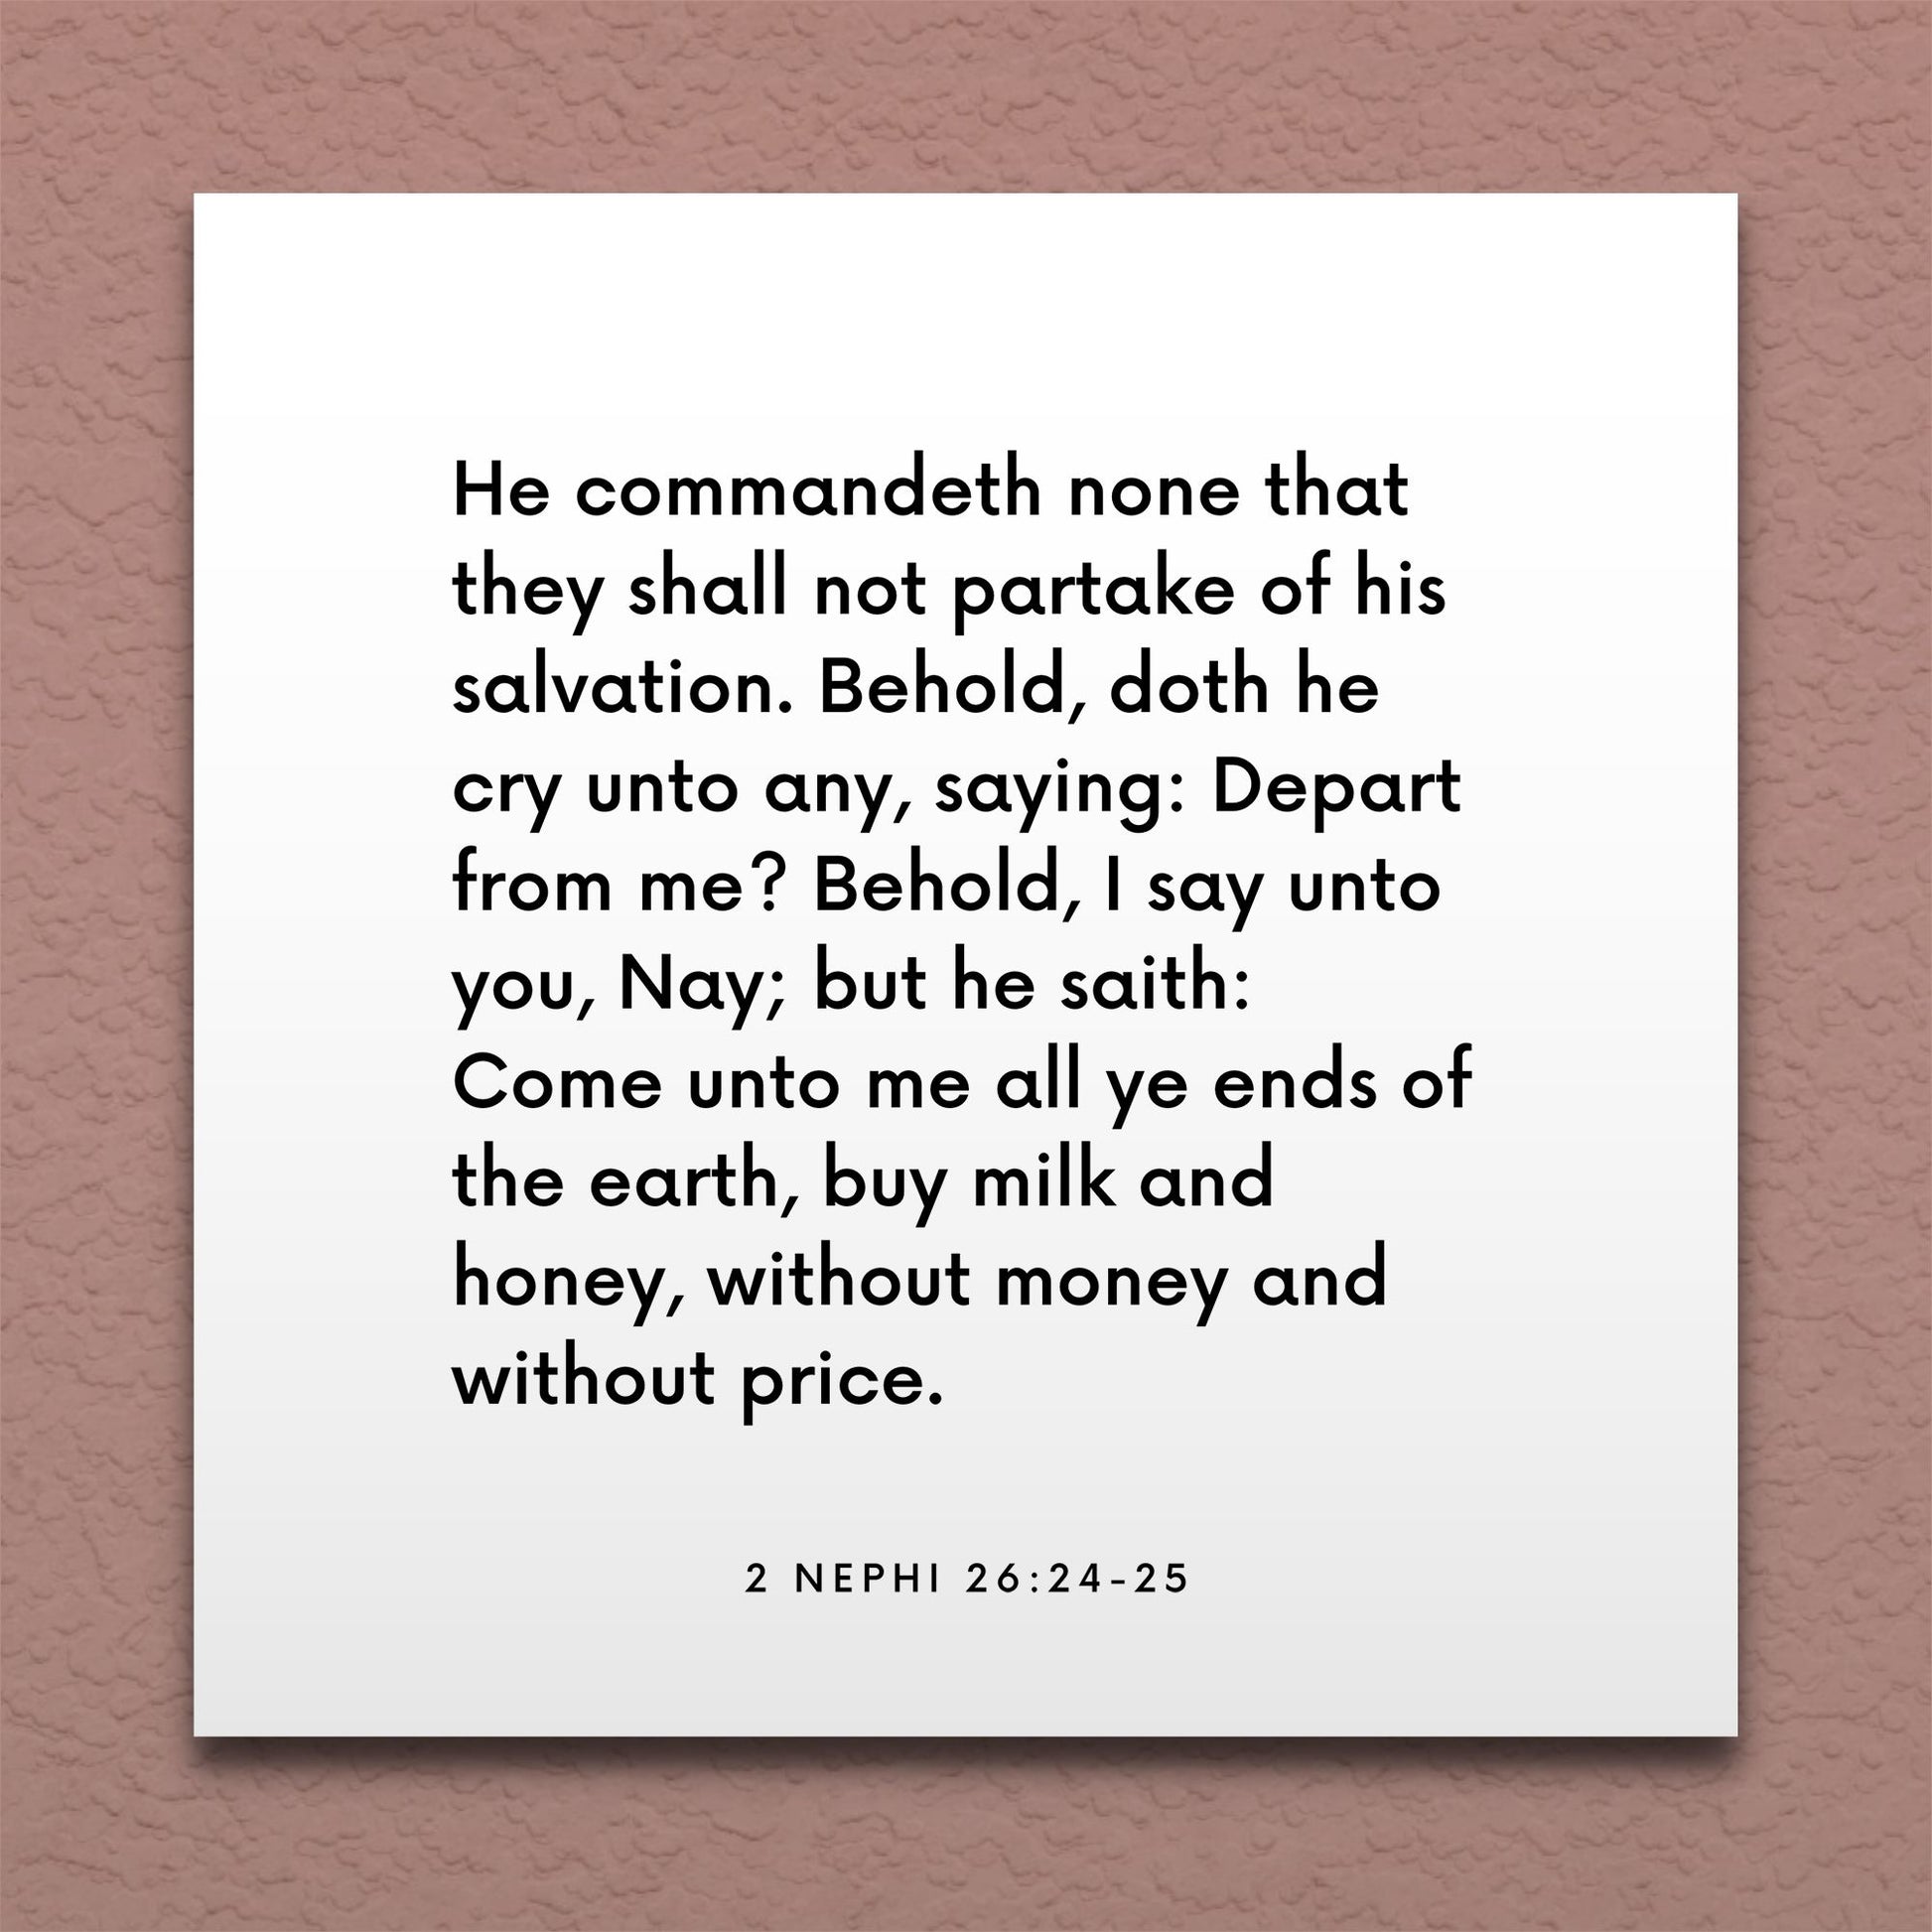 Wall-mounted scripture tile for 2 Nephi 26:24-25 - "Come unto me all ye ends of the earth"